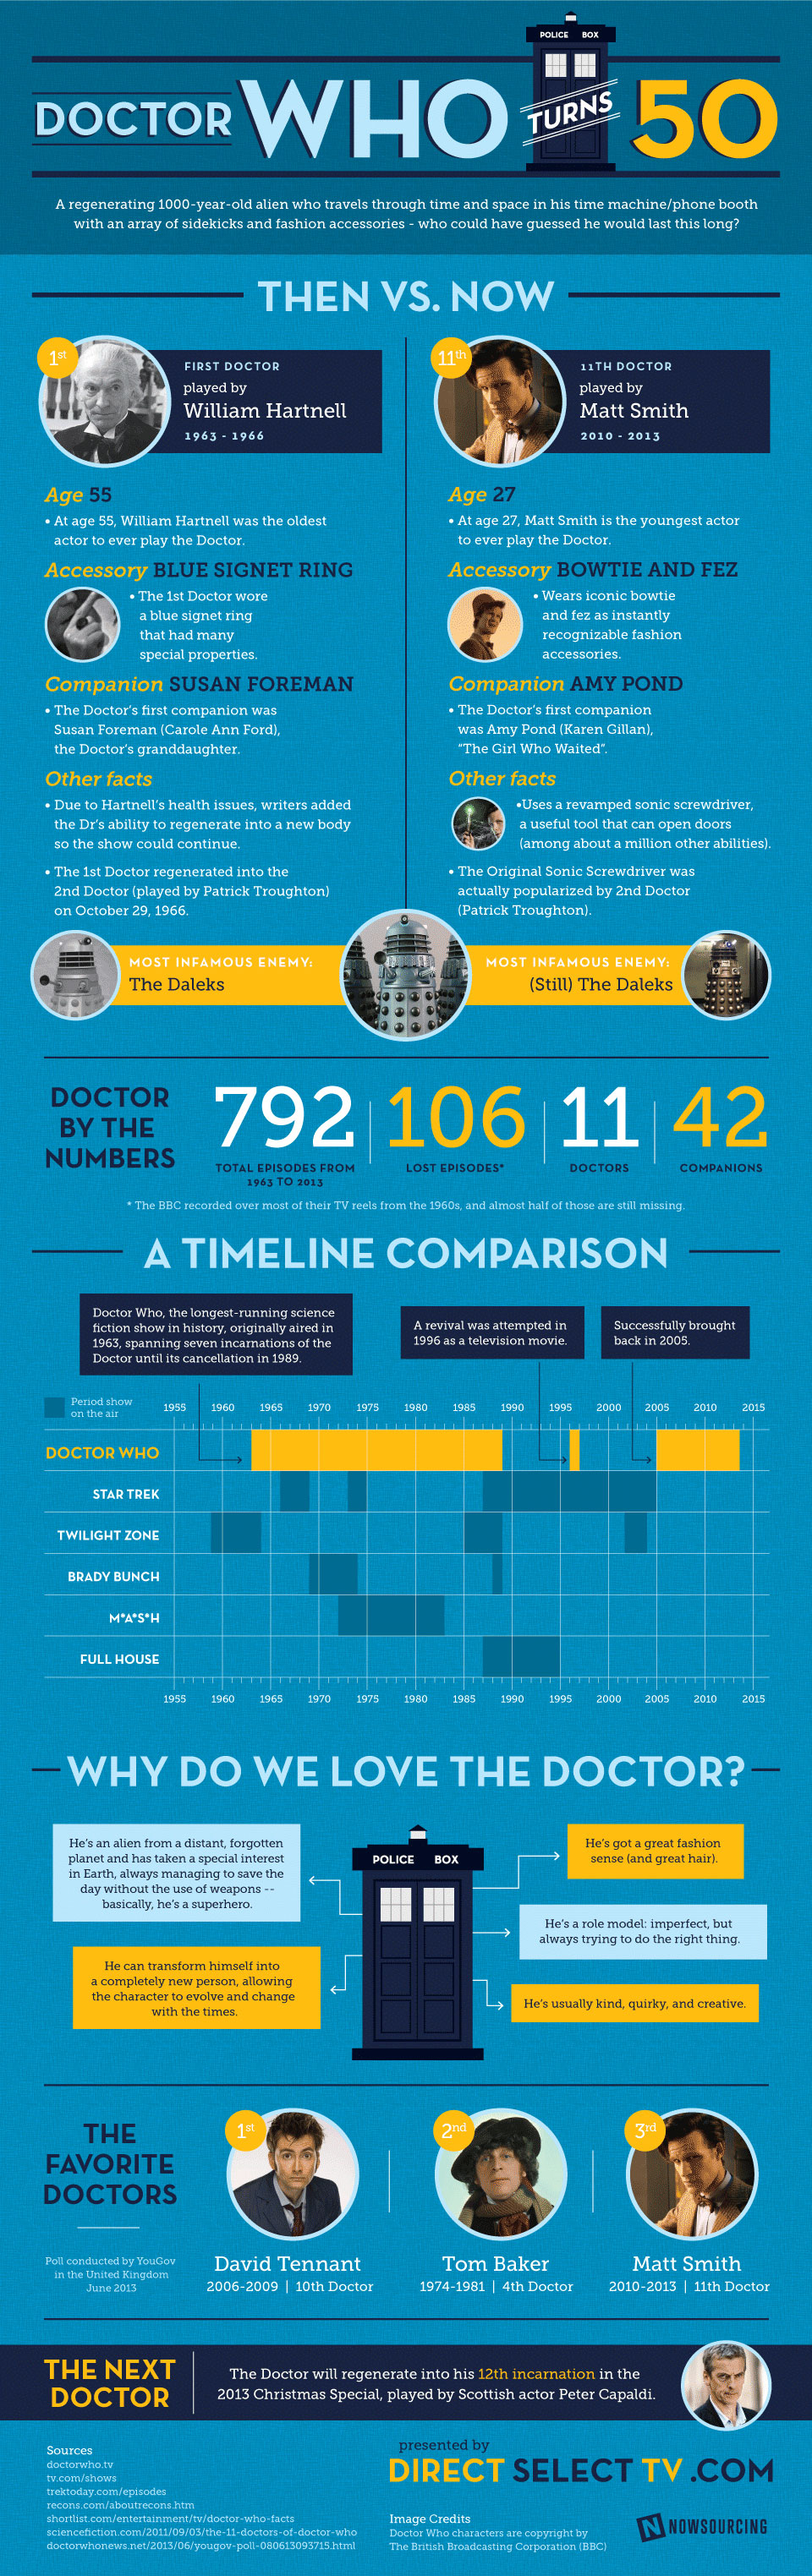 Doctor Who Science Fiction Fans: Travel Through Time [Infographic]